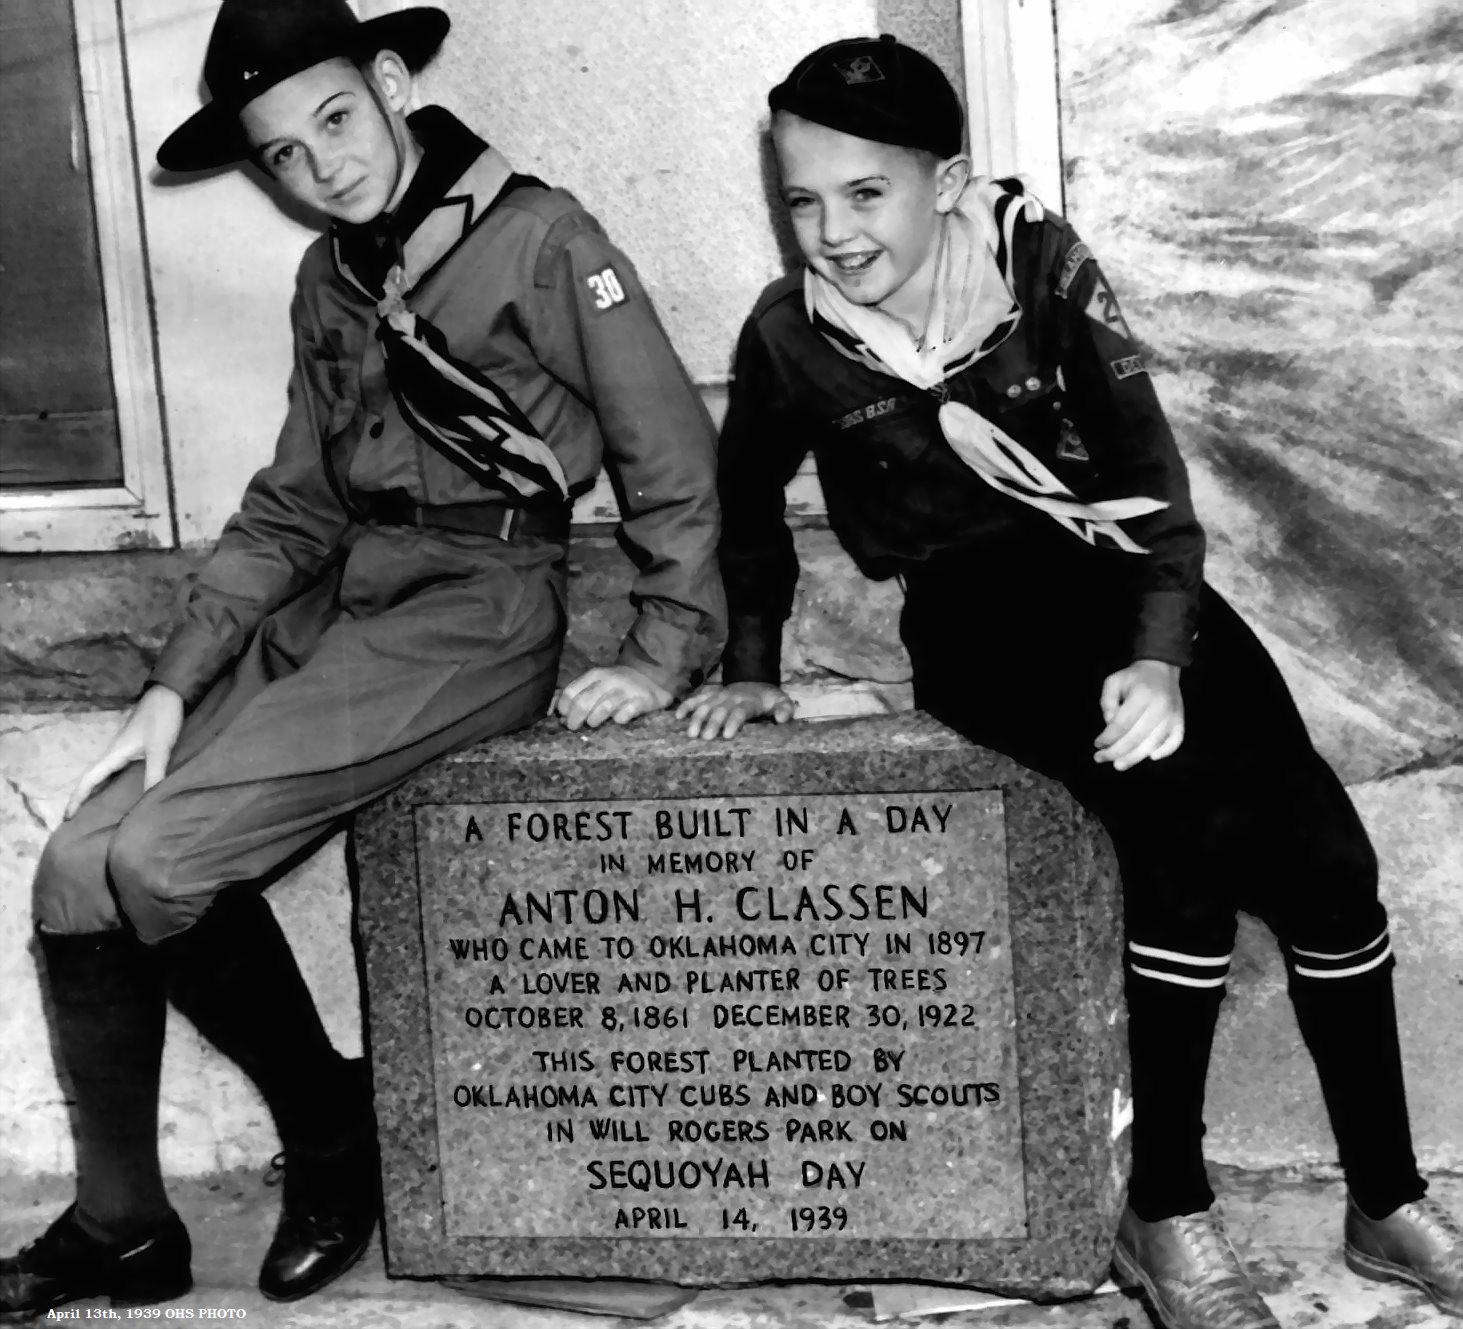 B/W picture of a boy scout and a cub scout sitting next to a plaque honoring 